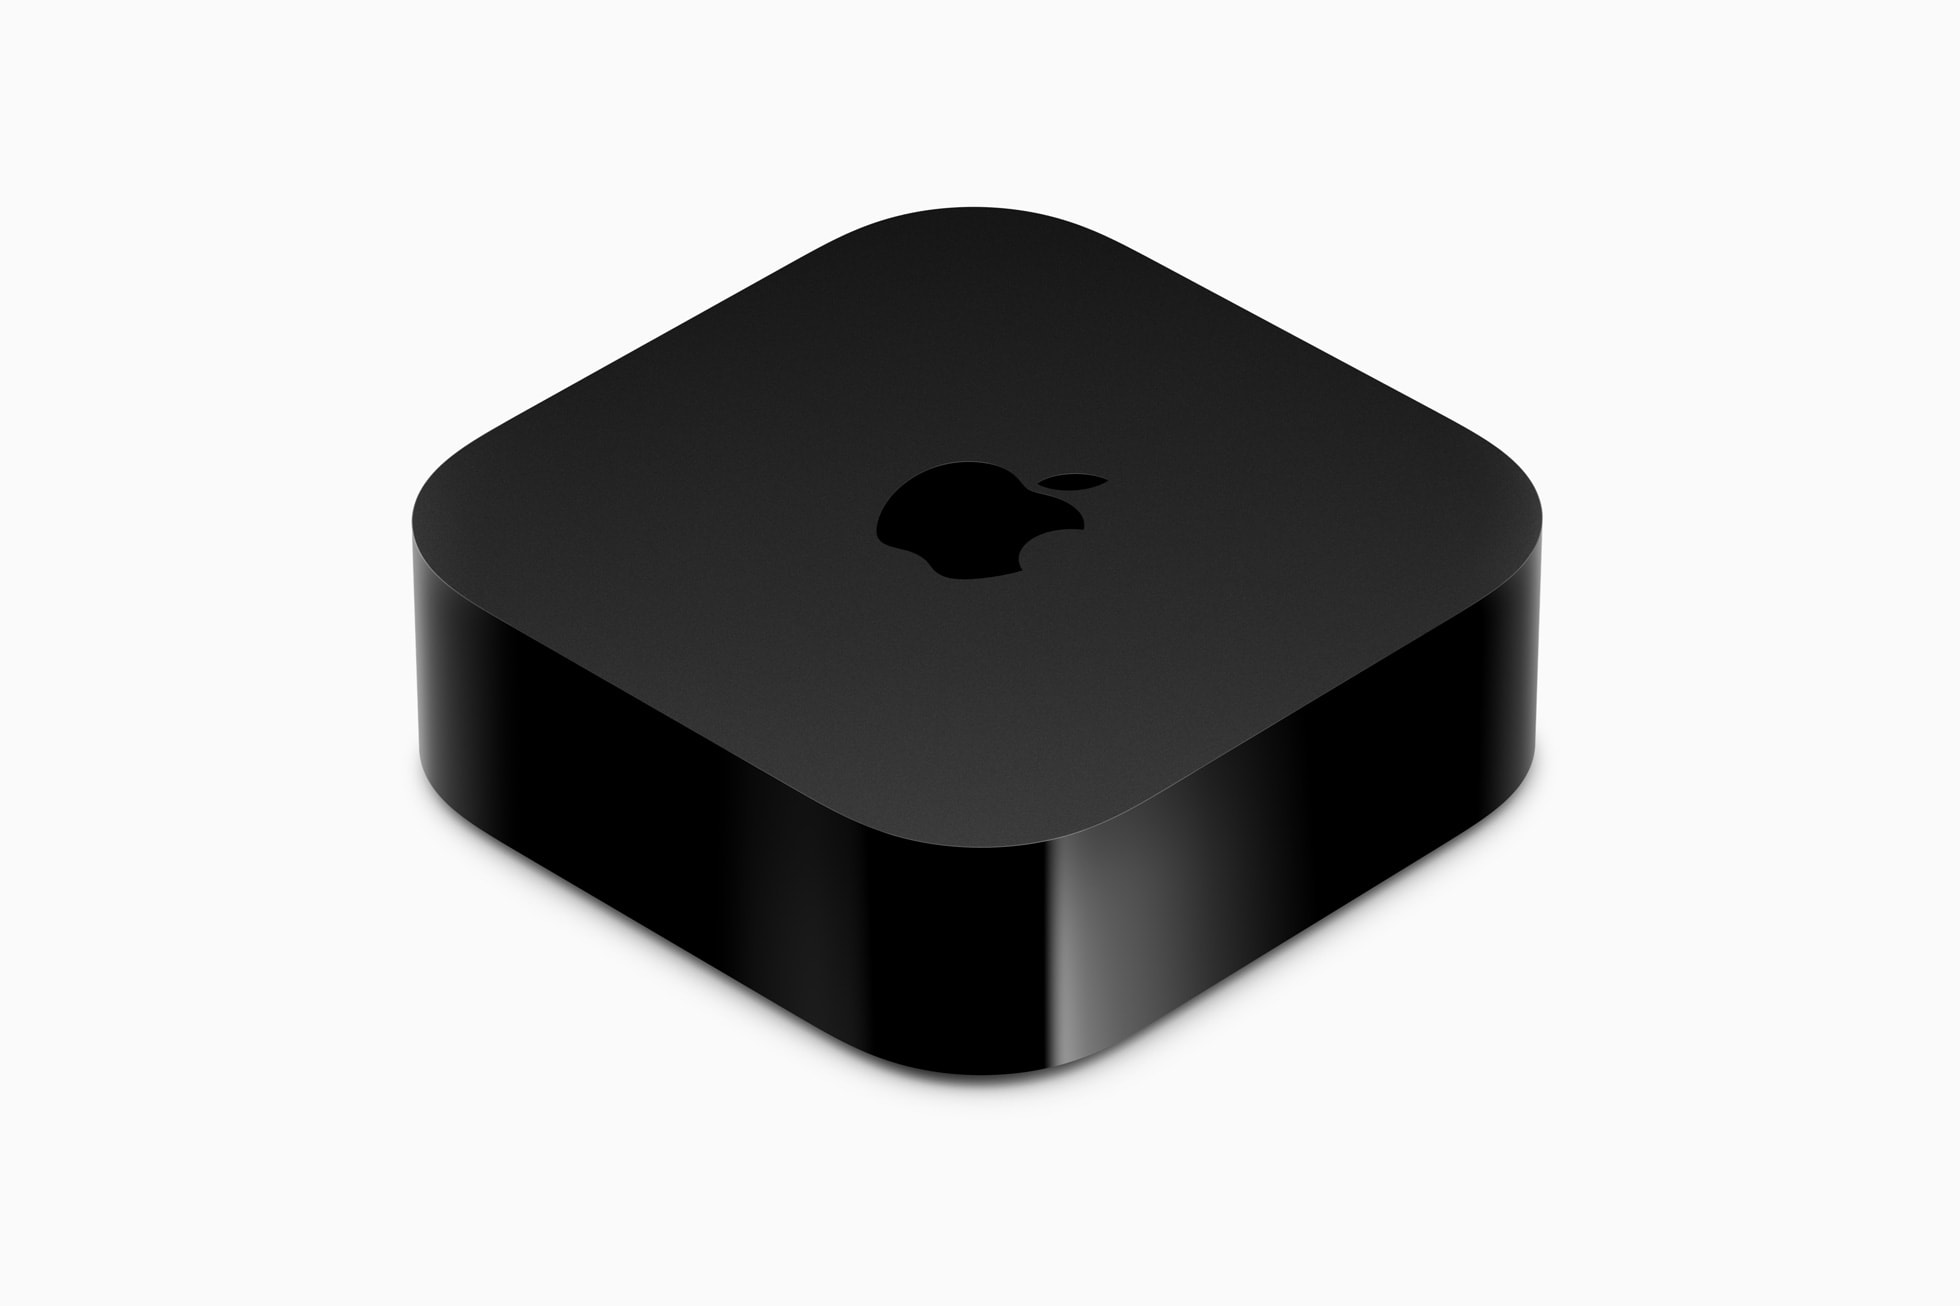 New Apple TV is Thinner and Weighs 50% Less With Fanless Design